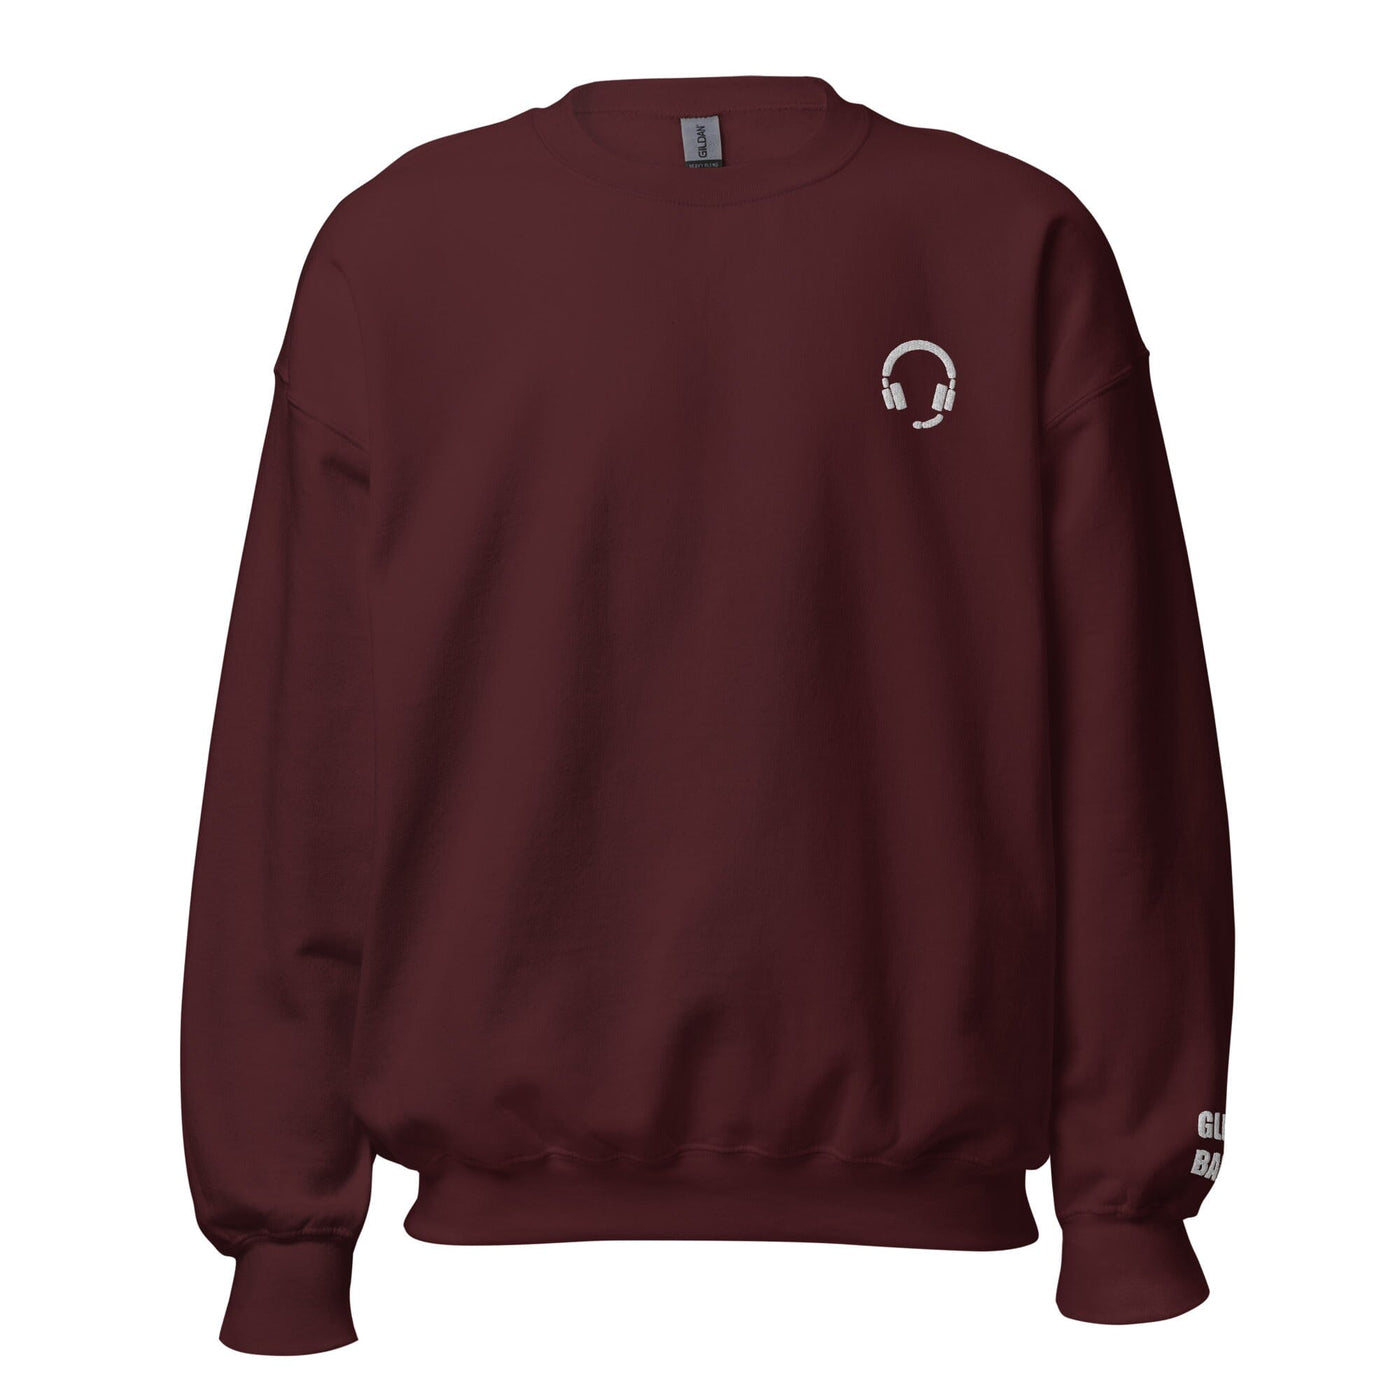 GLHF, Babe | Embroidered Unisex Sweatshirt | Gamer Affirmations Threads & Thistles Inventory Maroon S 